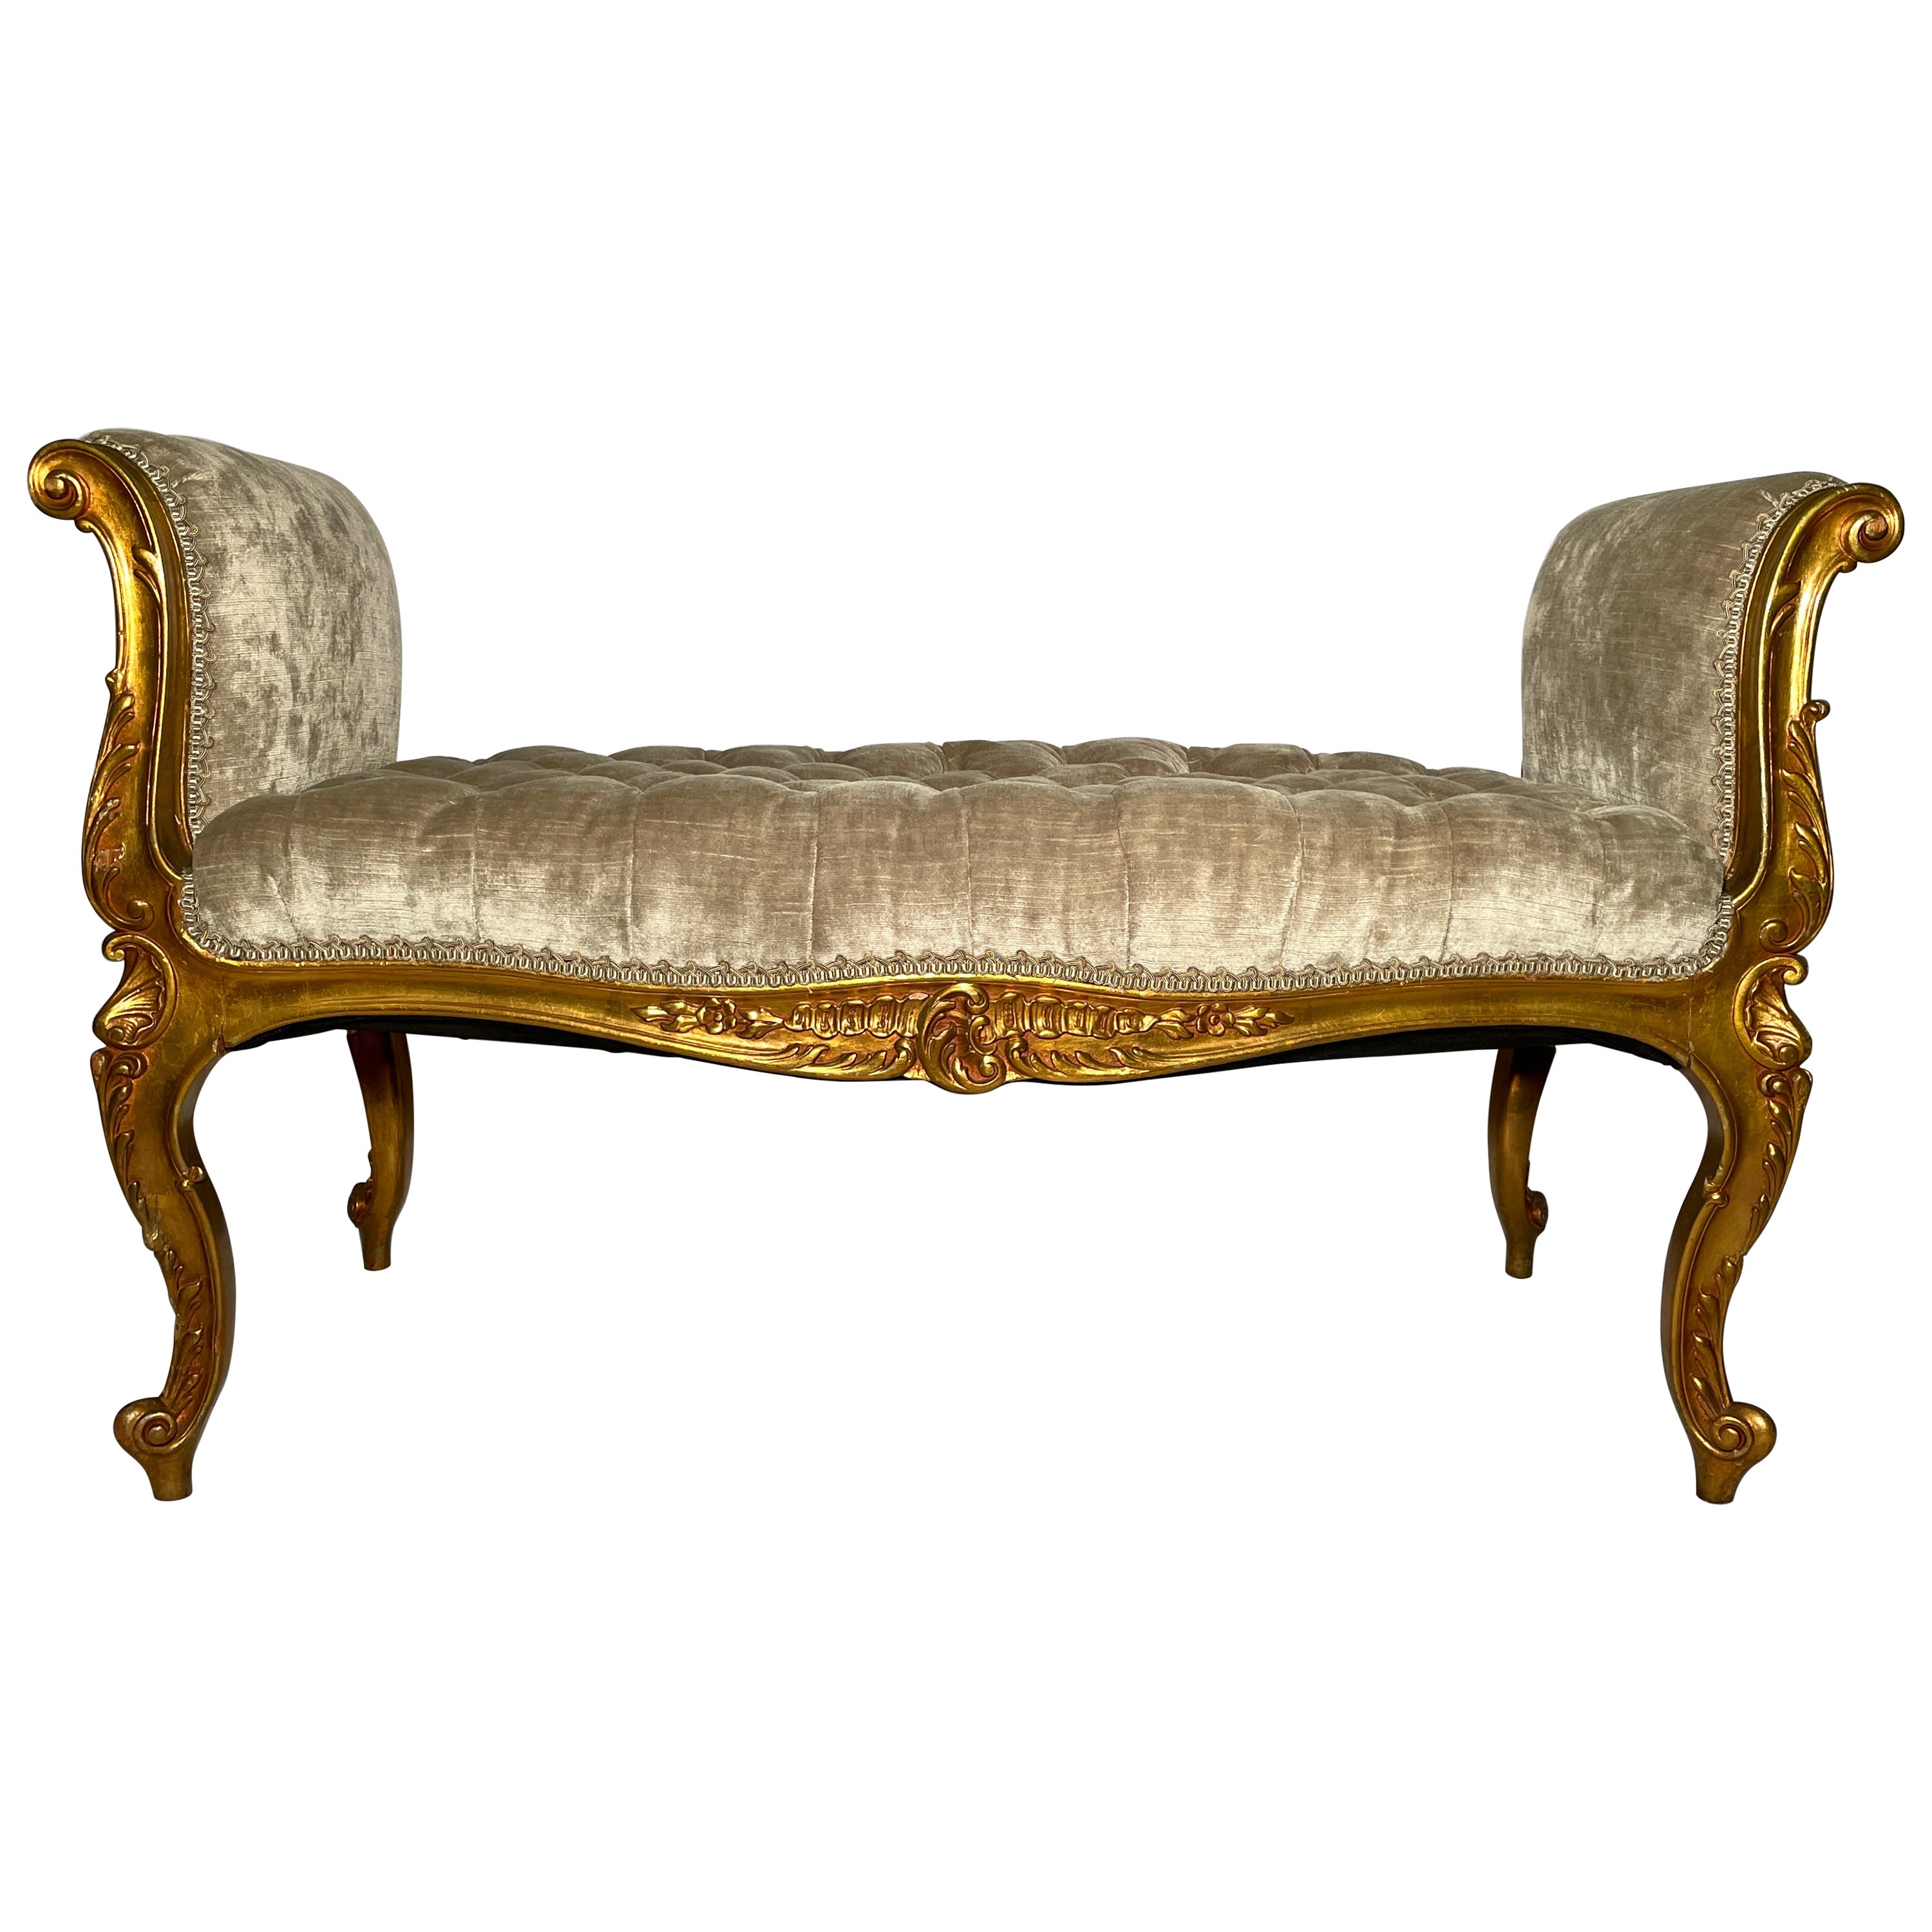 Antique French Carved Wood with Gold Leaf Bench, circa 1890